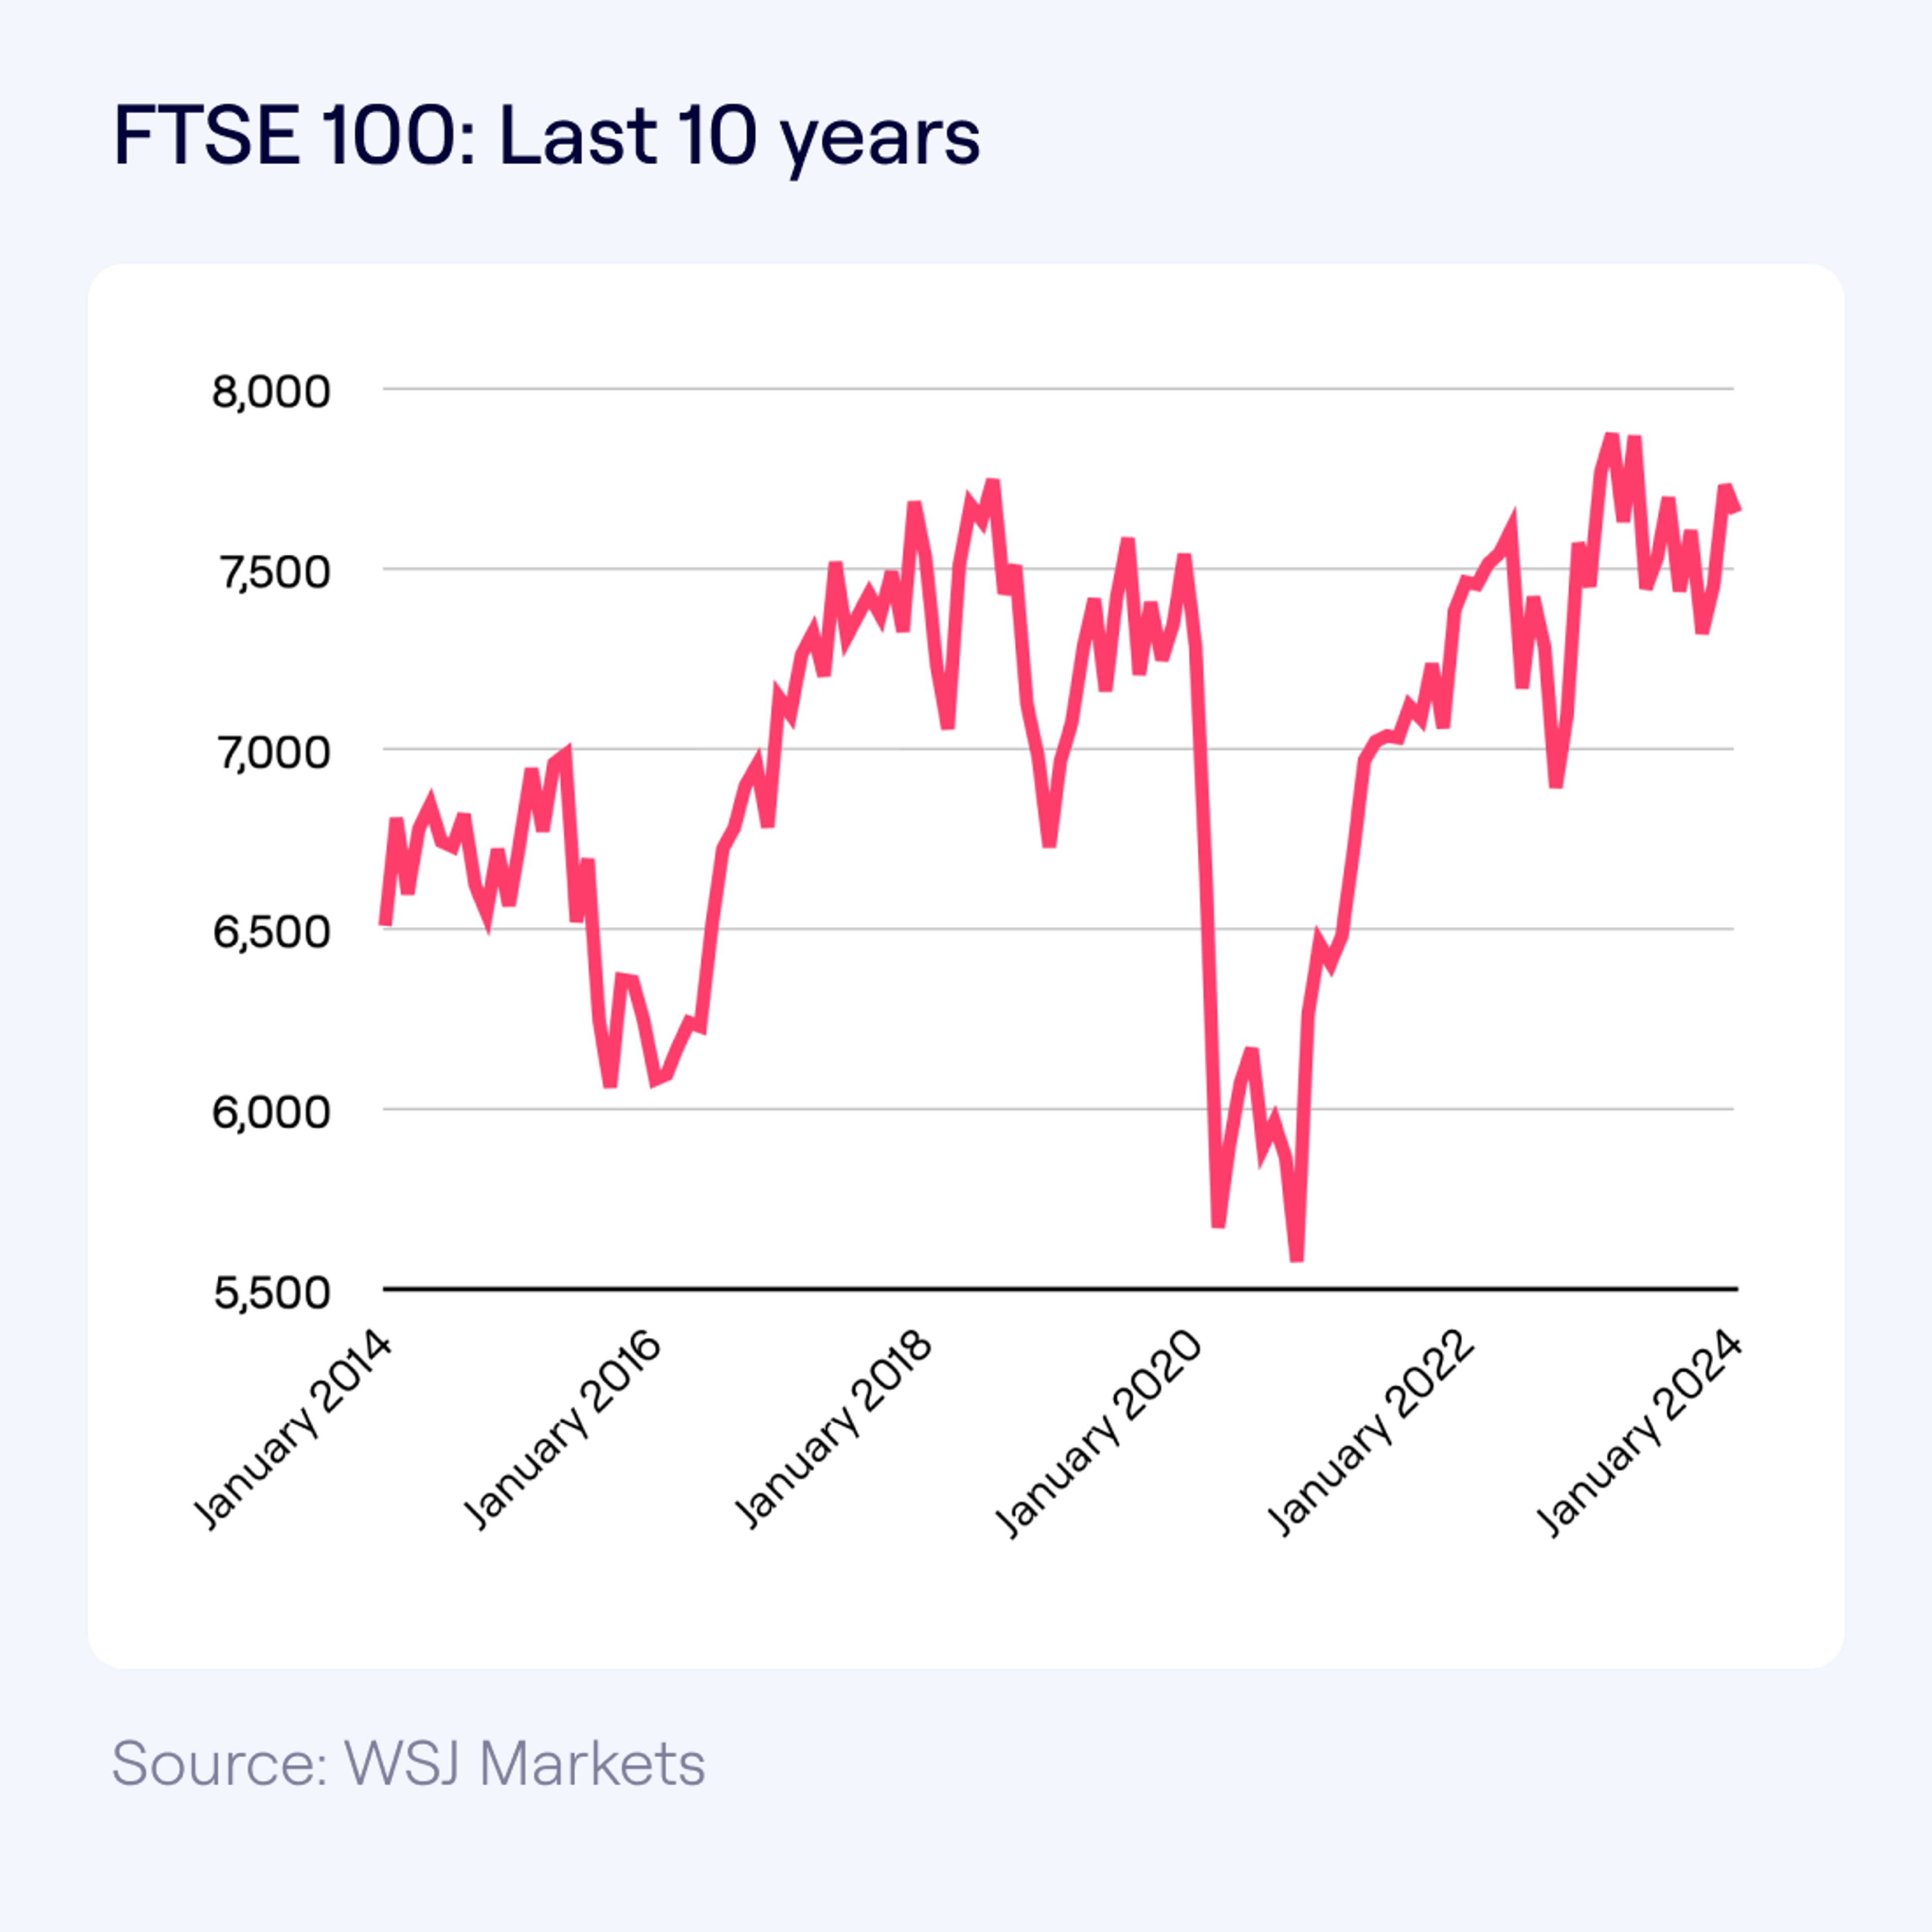 Line graph showing the FTSE 100 index over the last 10 years. It displays significant volatility with a sharp drop and recovery around the year 2020, and general upward movement since then, peaking near the end of the graph.